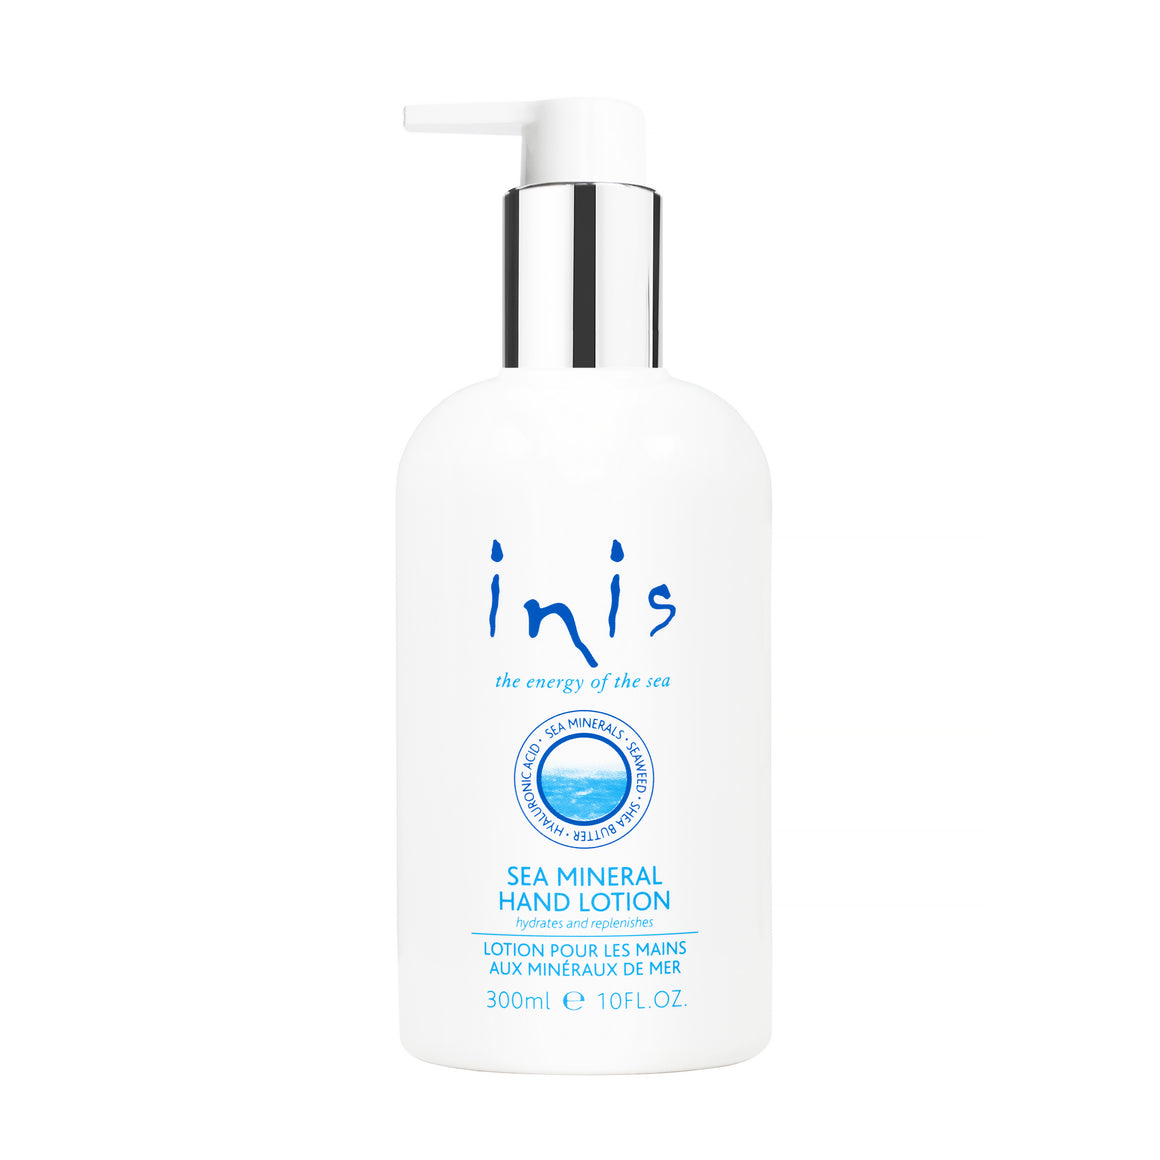 Inis Energy of the Sea Mineral Hand Lotion in a white bottle with pump